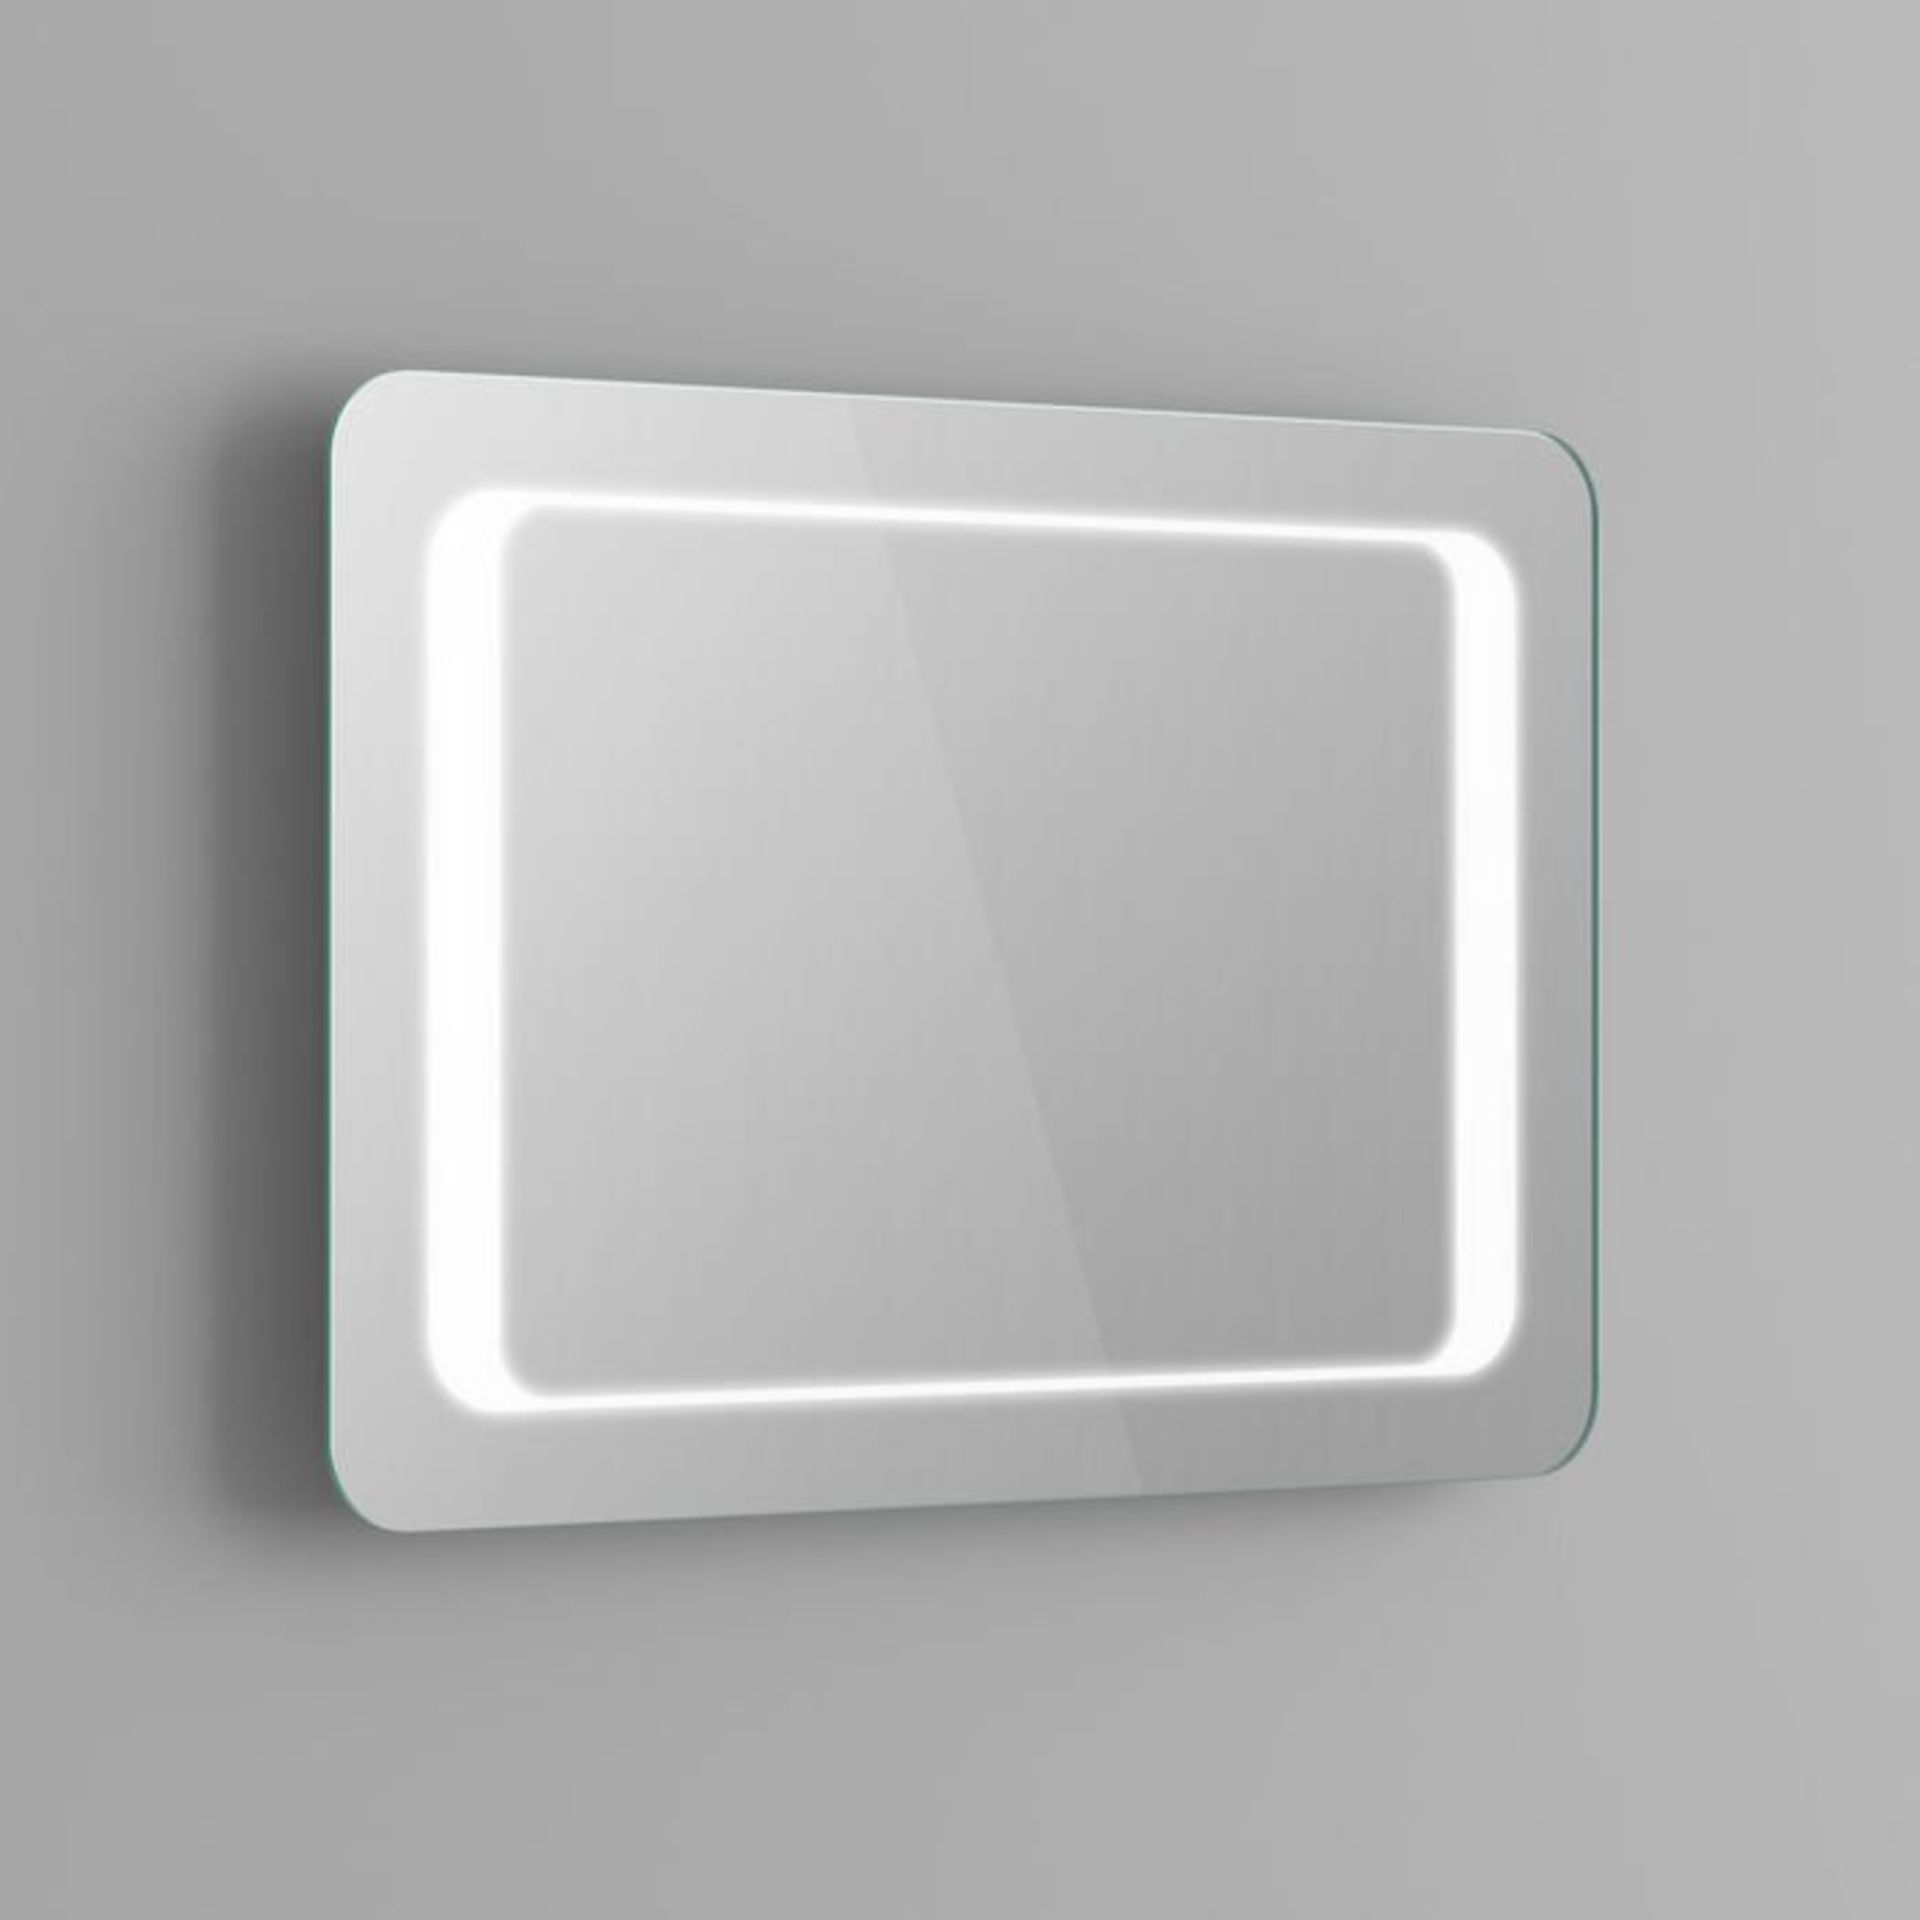 (Y29) 700x500mm Quasar Illuminated LED Mirror. RRP £349.99. Energy efficient LED lighting with - Image 10 of 10